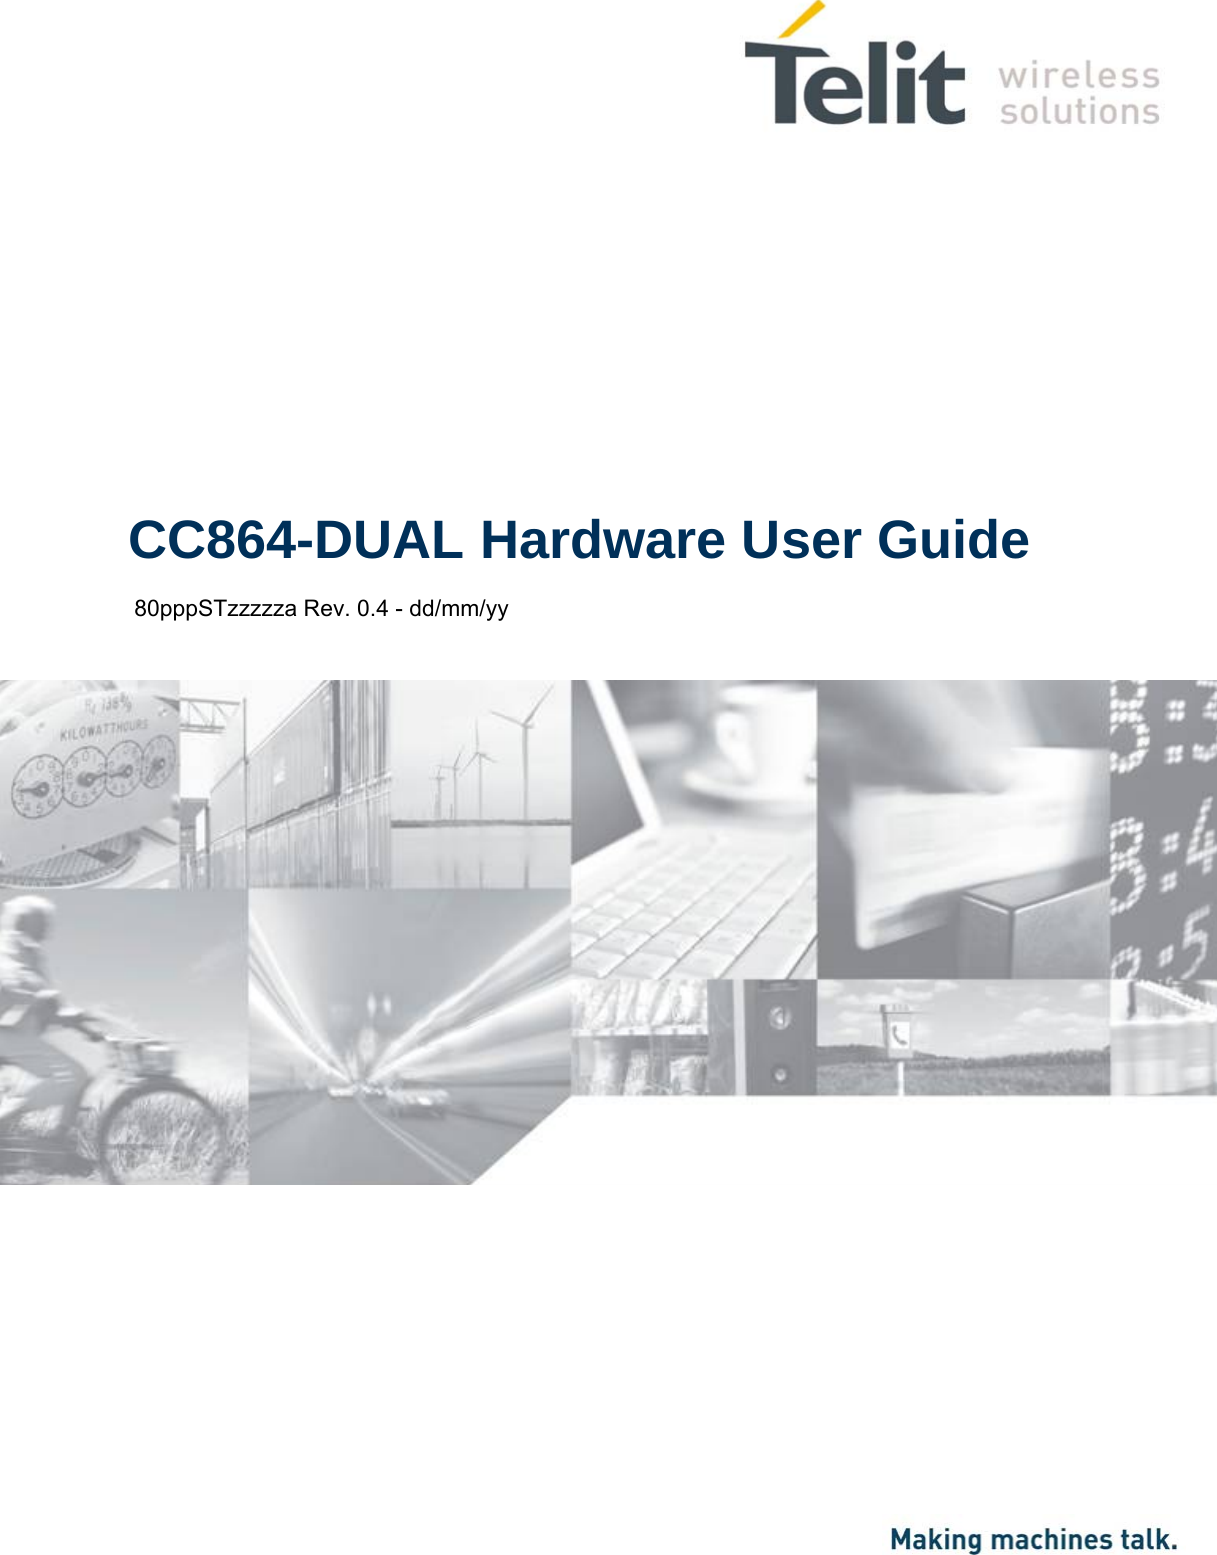                  CC864-DUAL Hardware User Guide  80pppSTzzzzza Rev. 0.4 - dd/mm/yy        